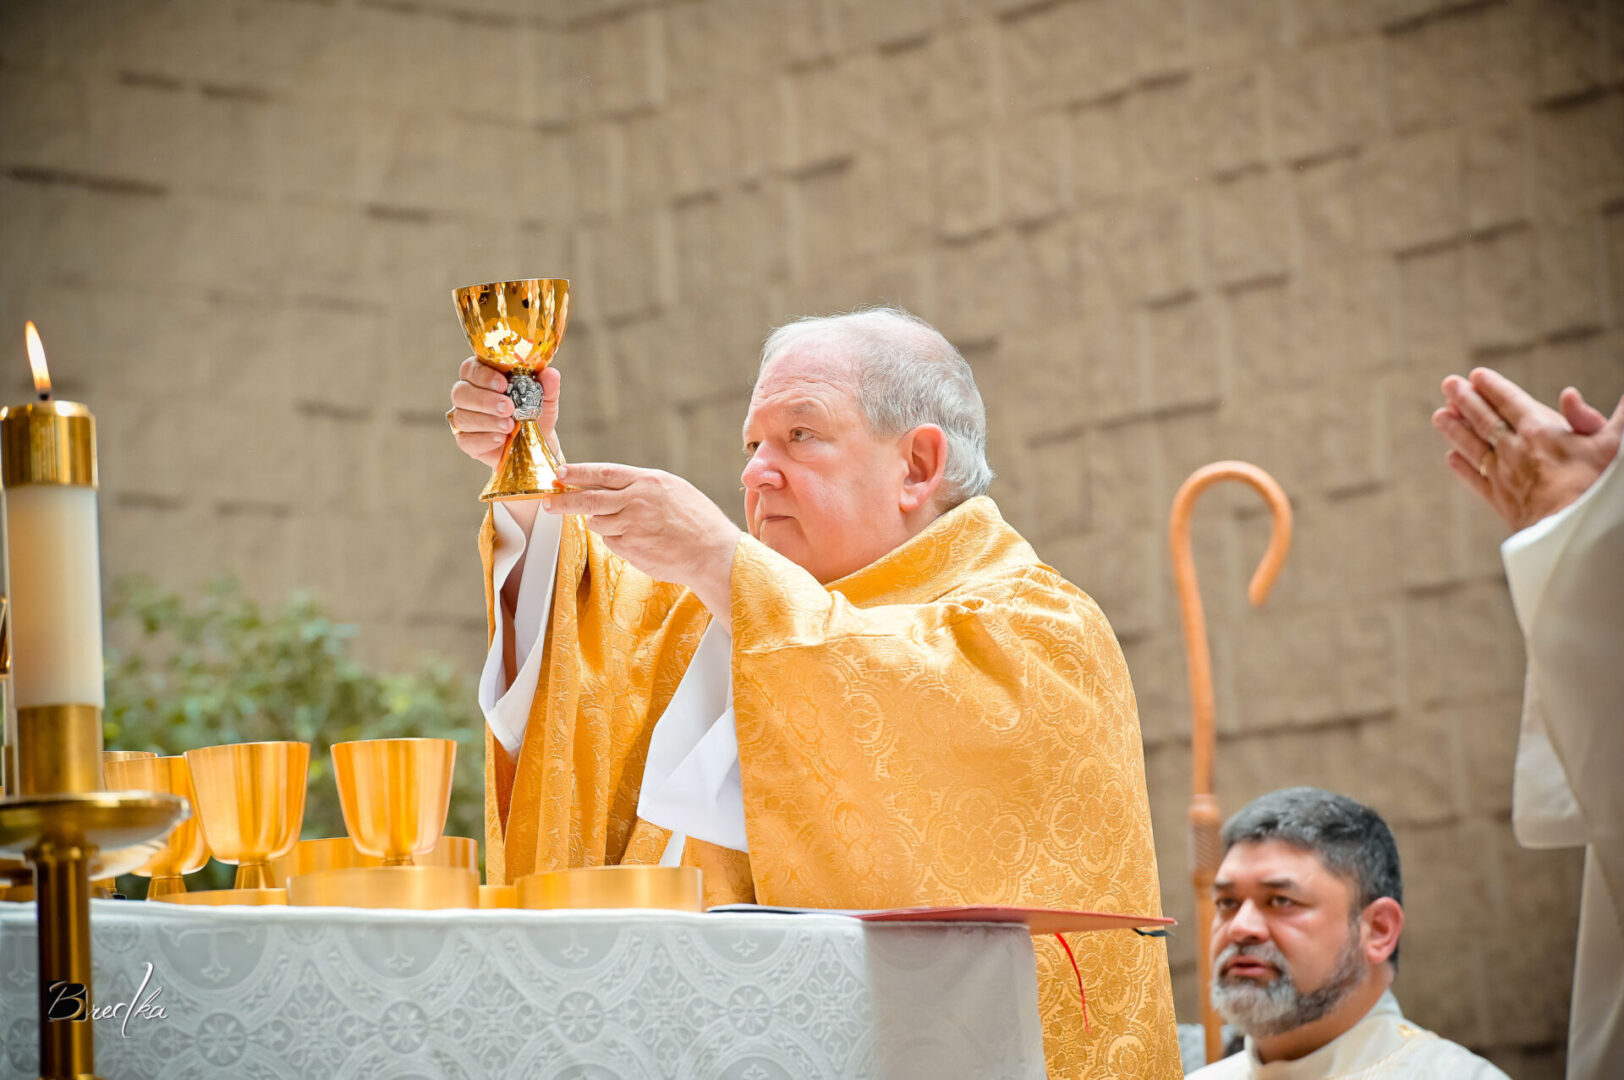 Priest holding a chalice during mass.